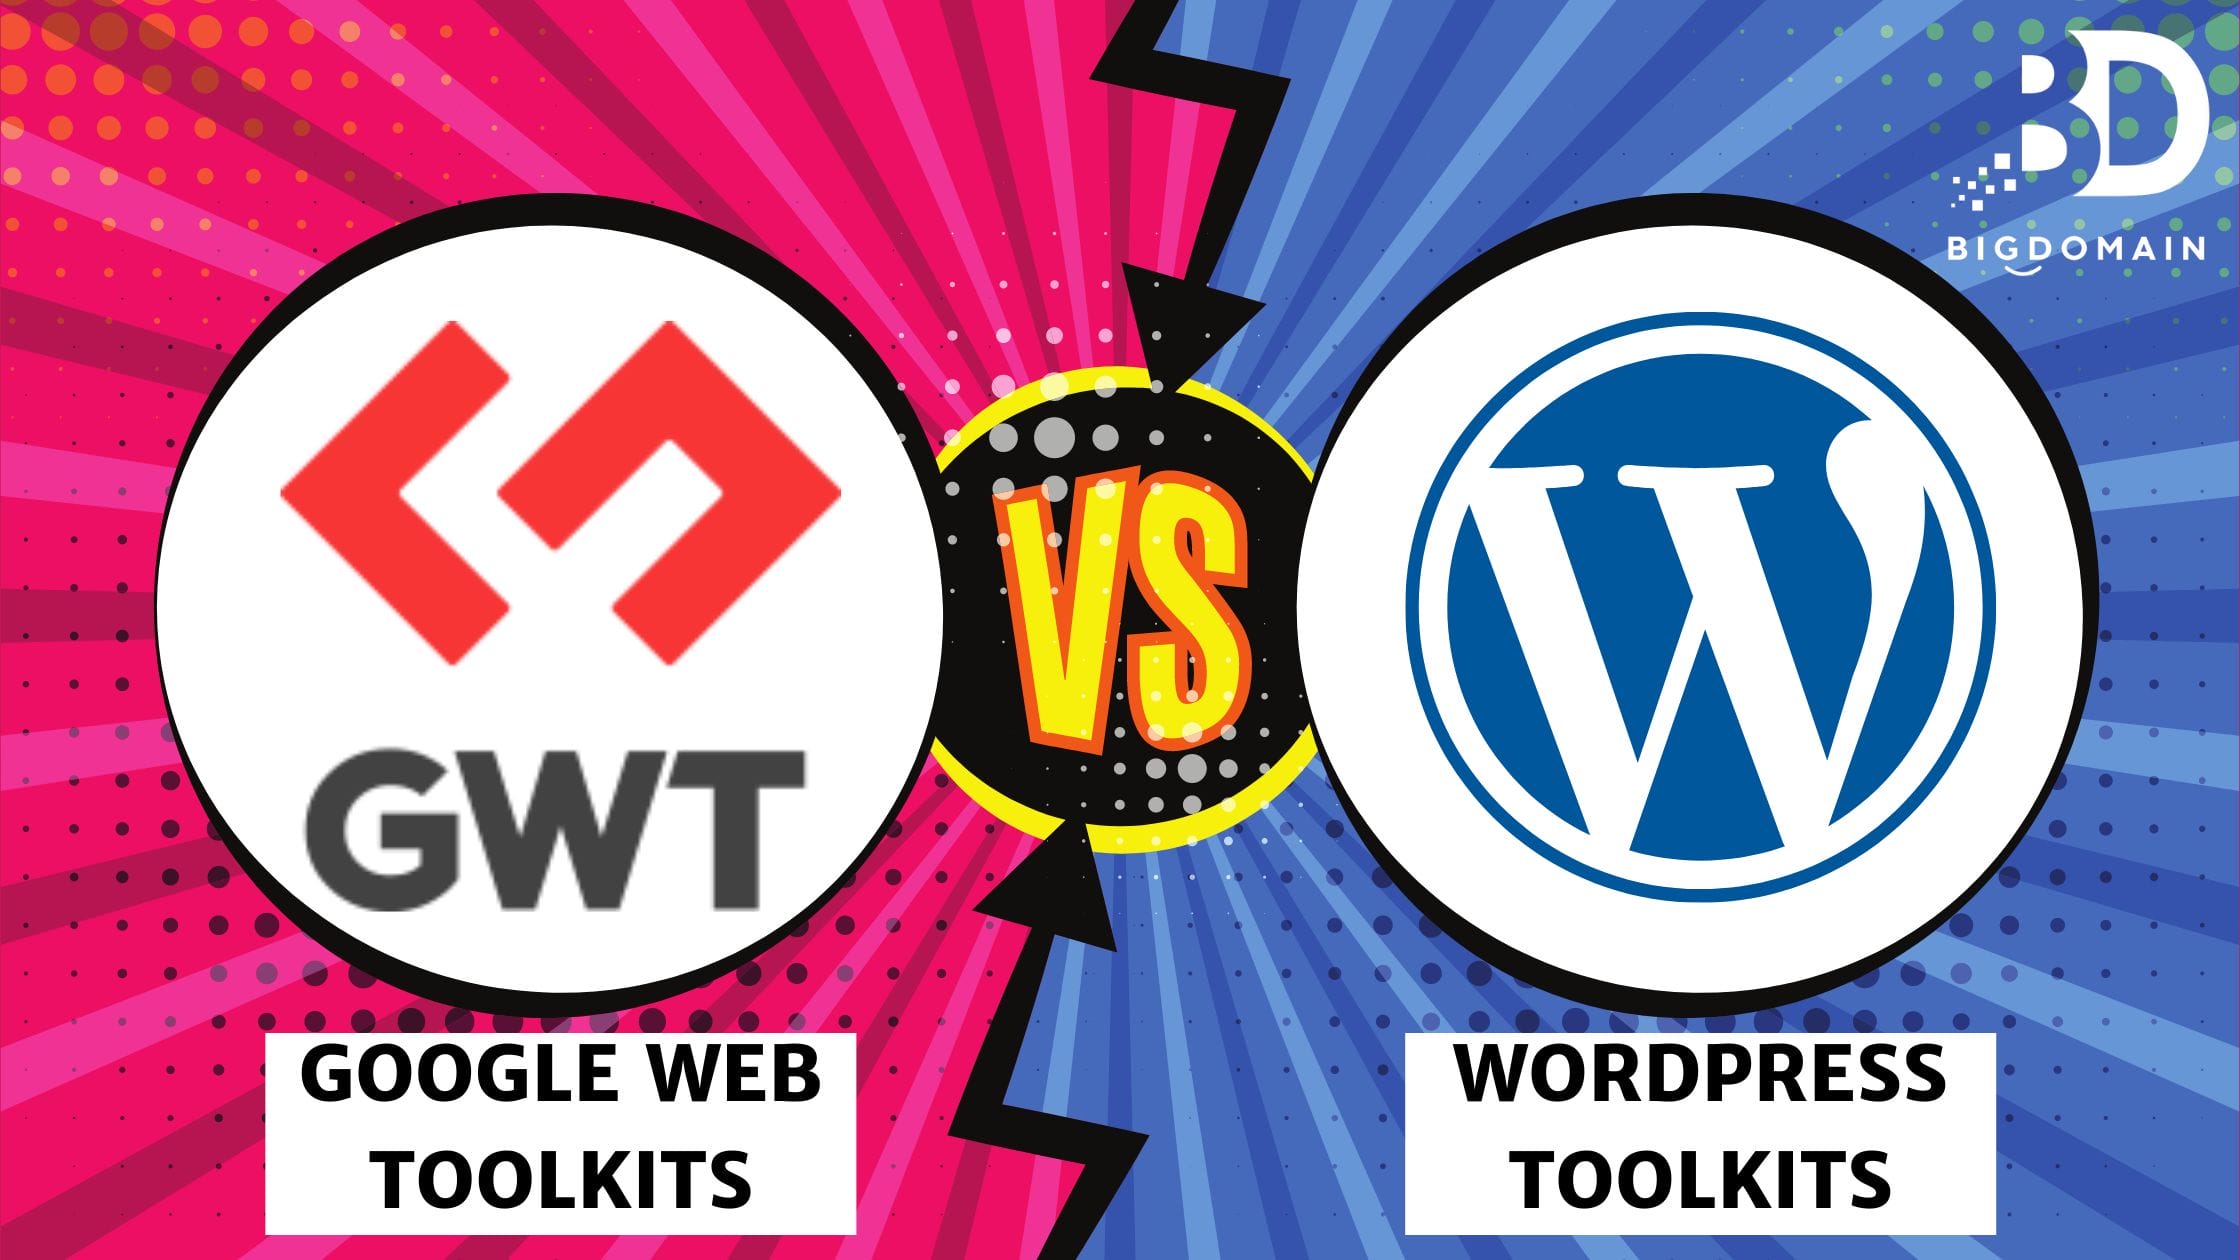 WordPress Vs Google Toolkit: Which Is Better For You?